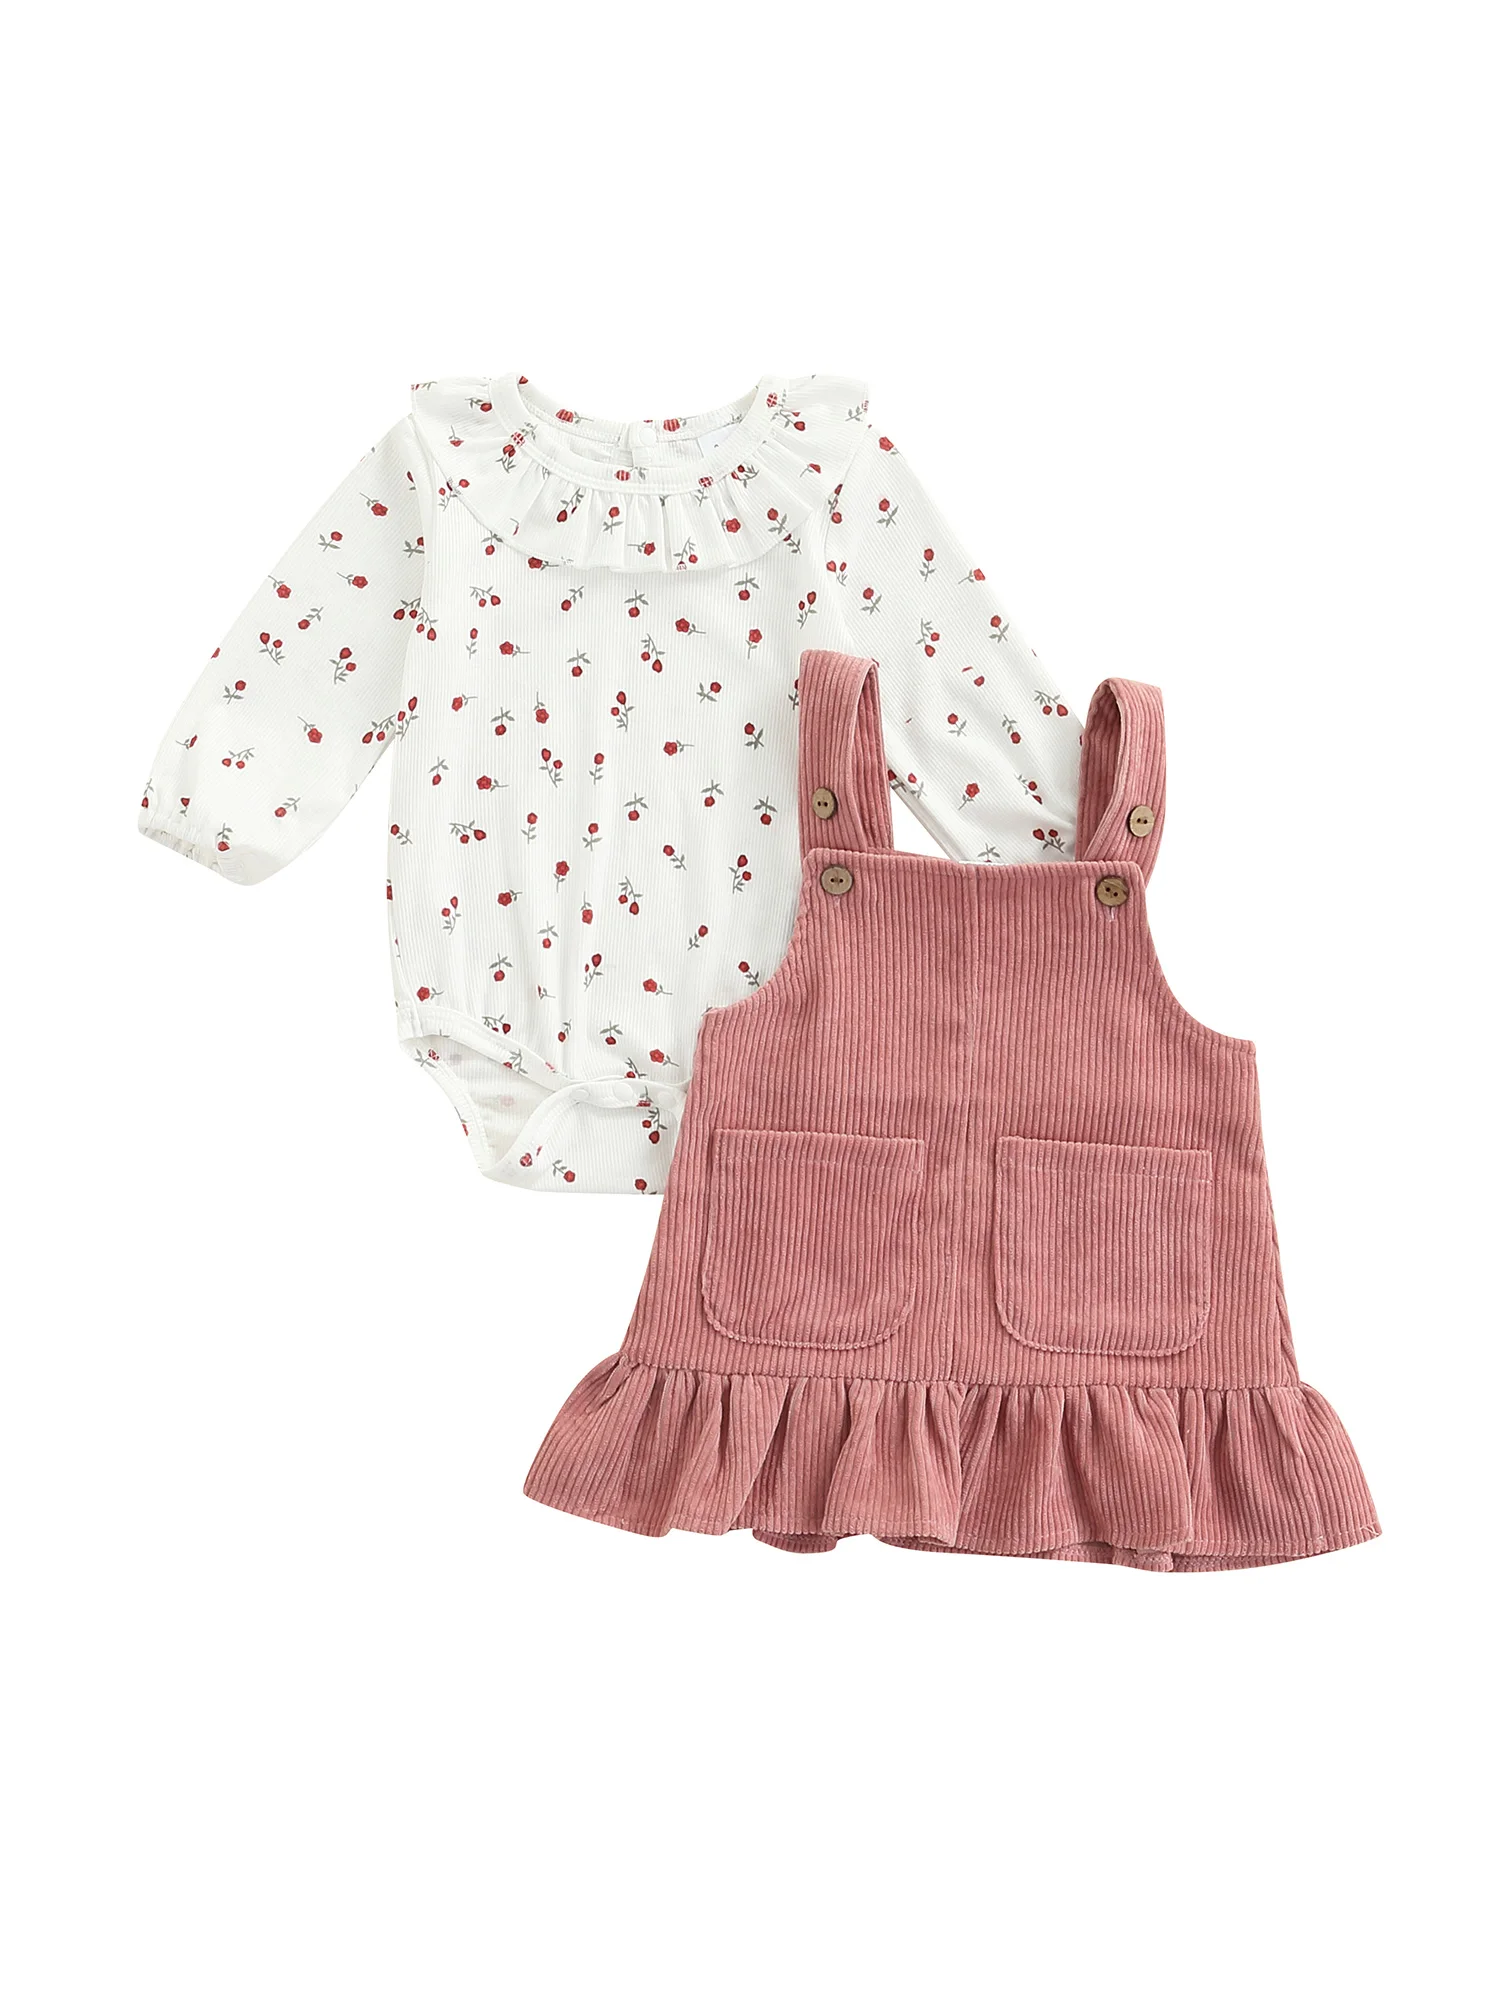 

2PCS Newborn Baby Girl Clothes Long Sleeve Floral Print Flounce Romper and Ruffle Suspender Skirt Sets